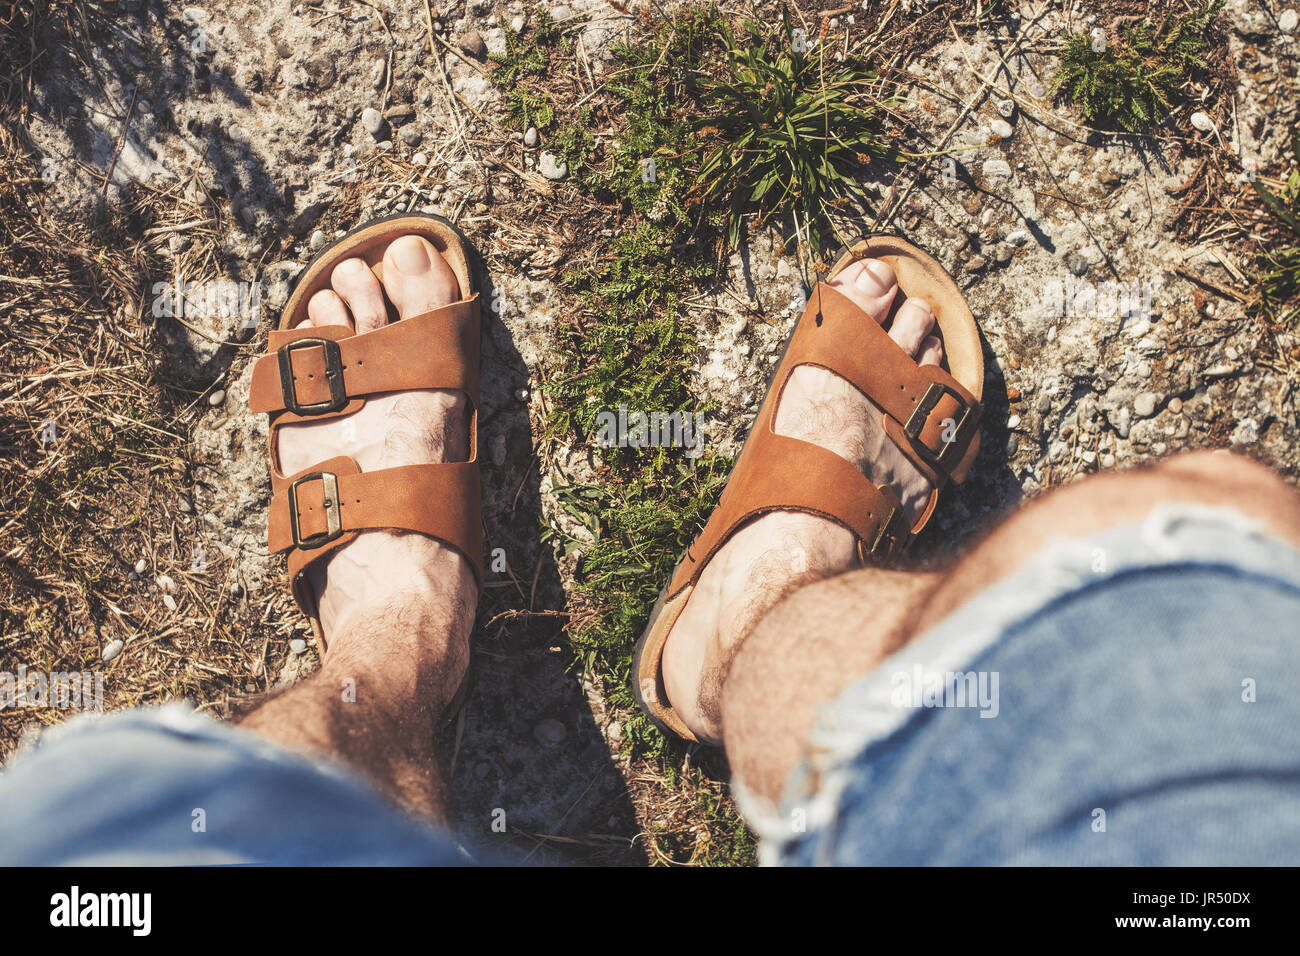 Top view of male legs in brown leather sandals and blue jean shorts, standing on a rocky trail Stock Photo